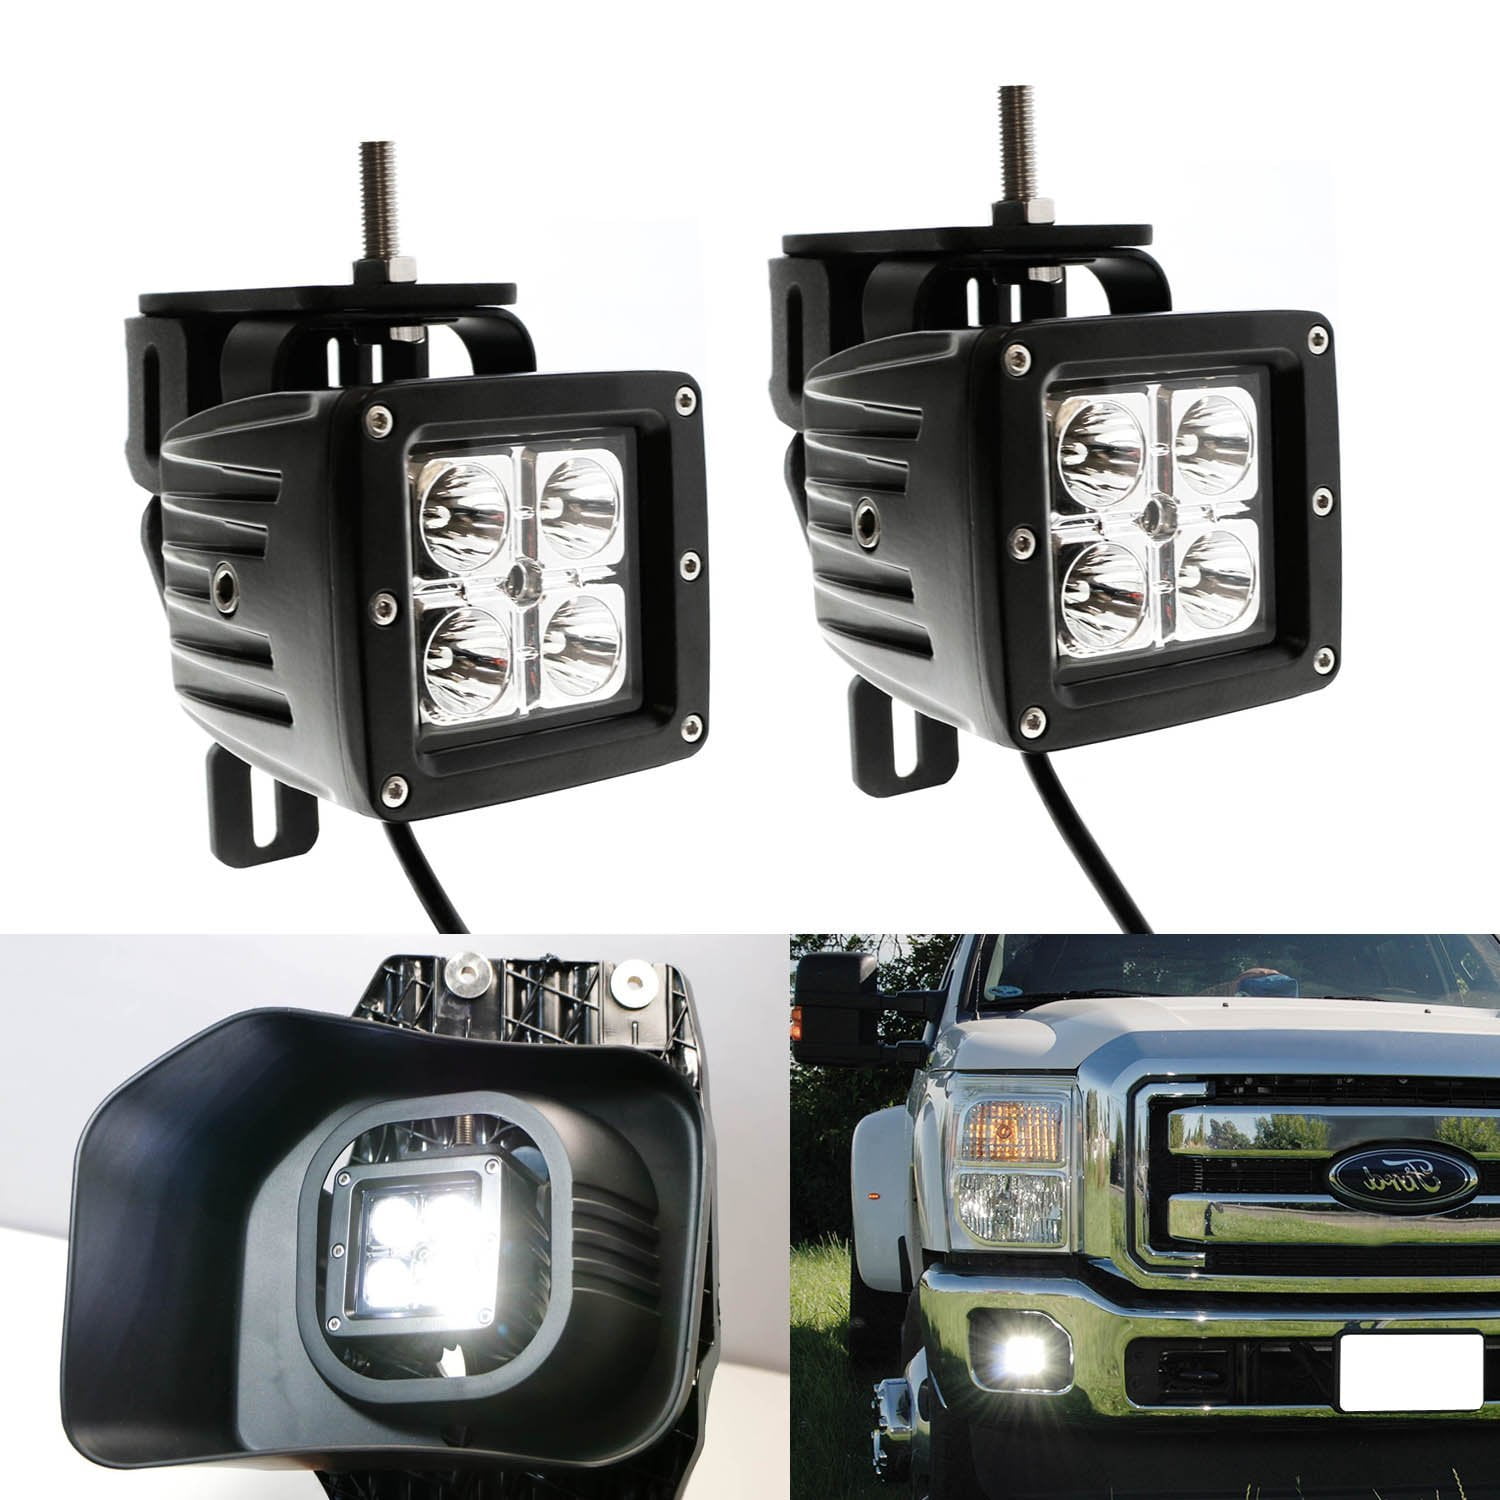 2 iJDMTOY LED Pod Light Fog Lamp Kit For 1999-04 Ford F250 F350 F450 Super Duty 20W CREE LED Cubes Lower Bumper Fog Location Mounting Brackets & On/Off Switch Wiring Kit Includes 